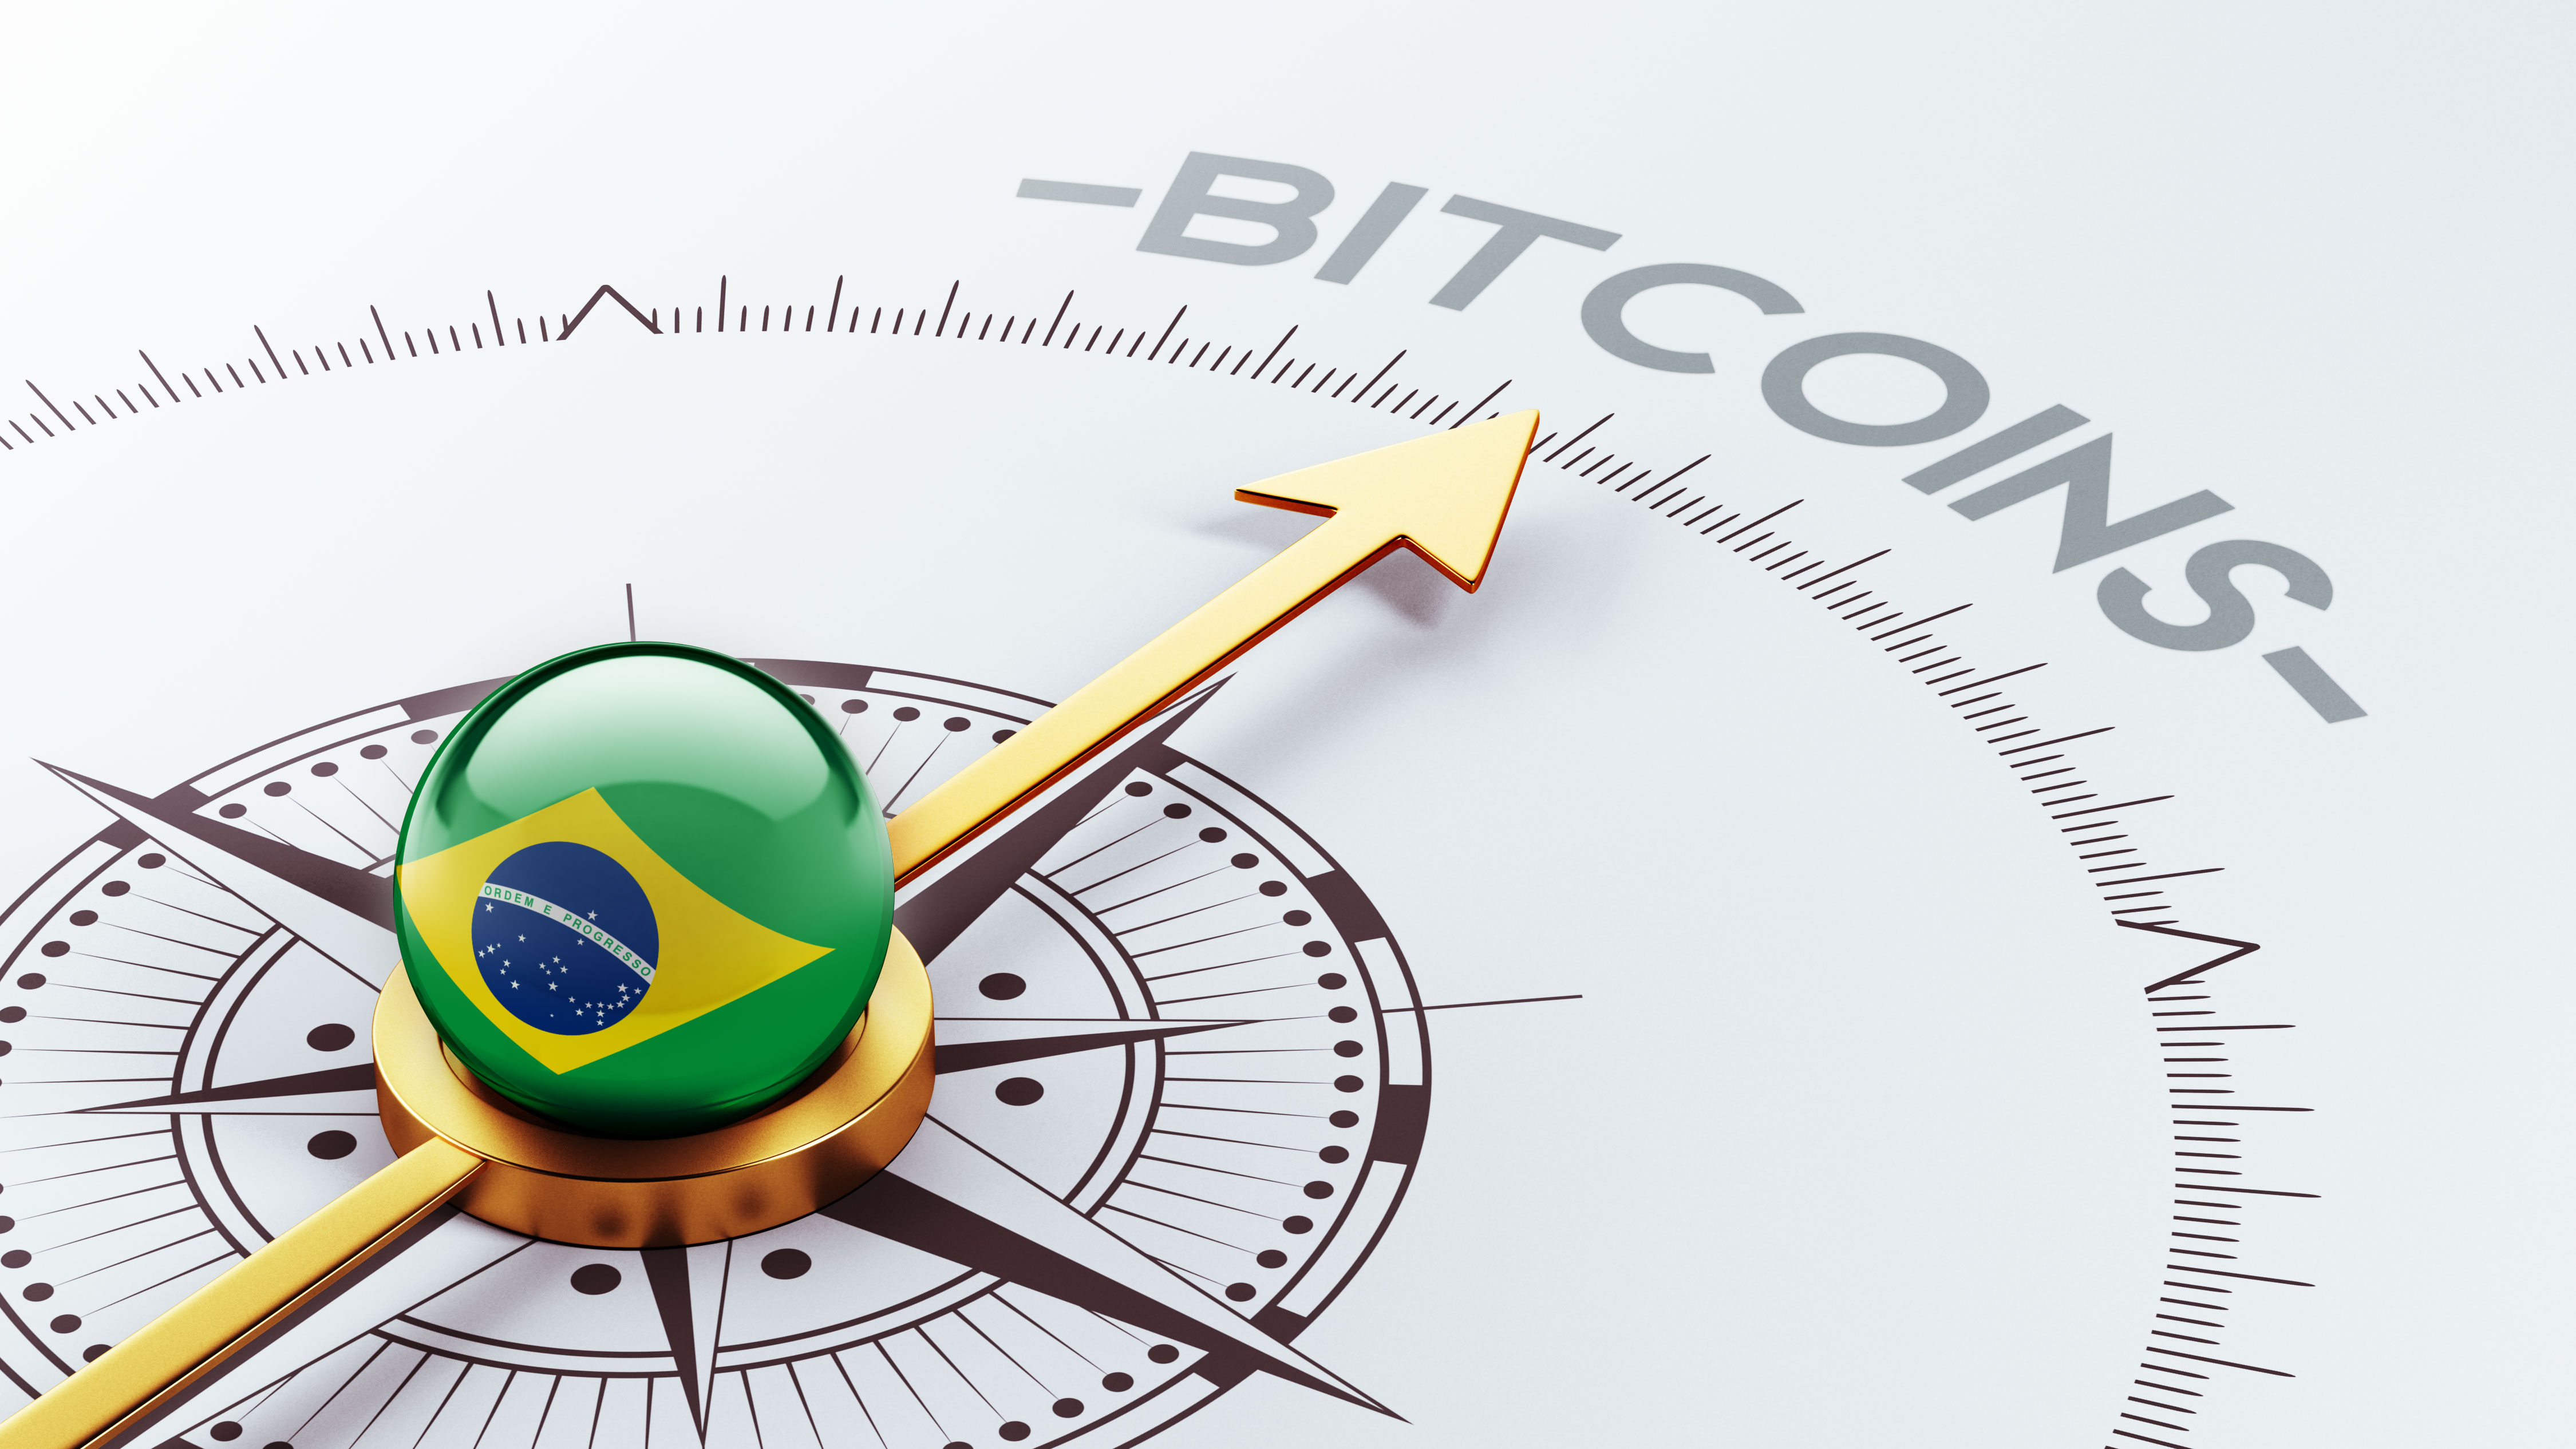 Brazilian banks relent on anti-crypto actions following court judgement